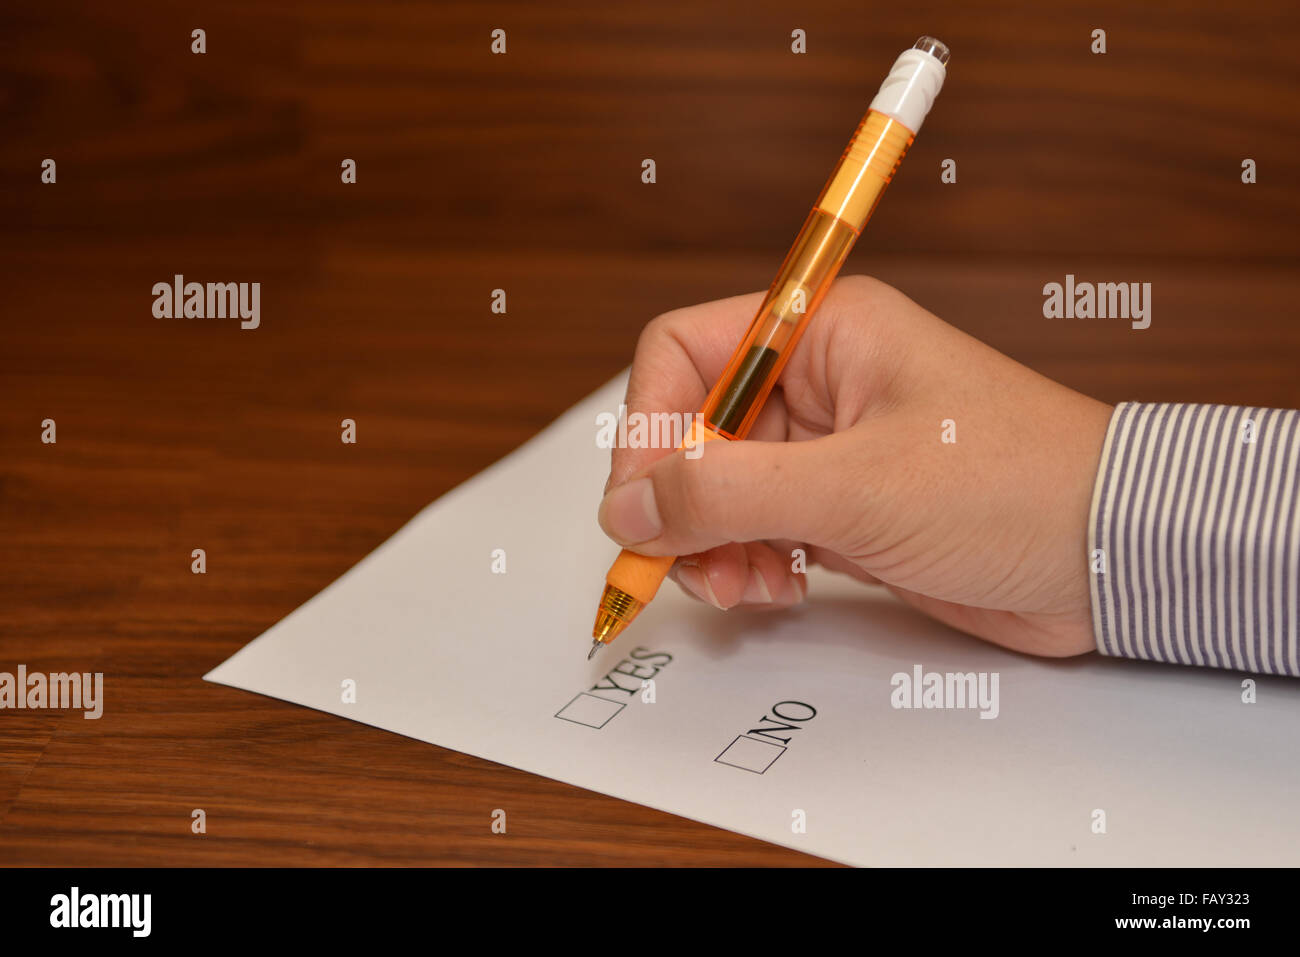 background, boss, business, businessman, business people, close up, confident, copy space, corporate, draw, focus Stock Photo